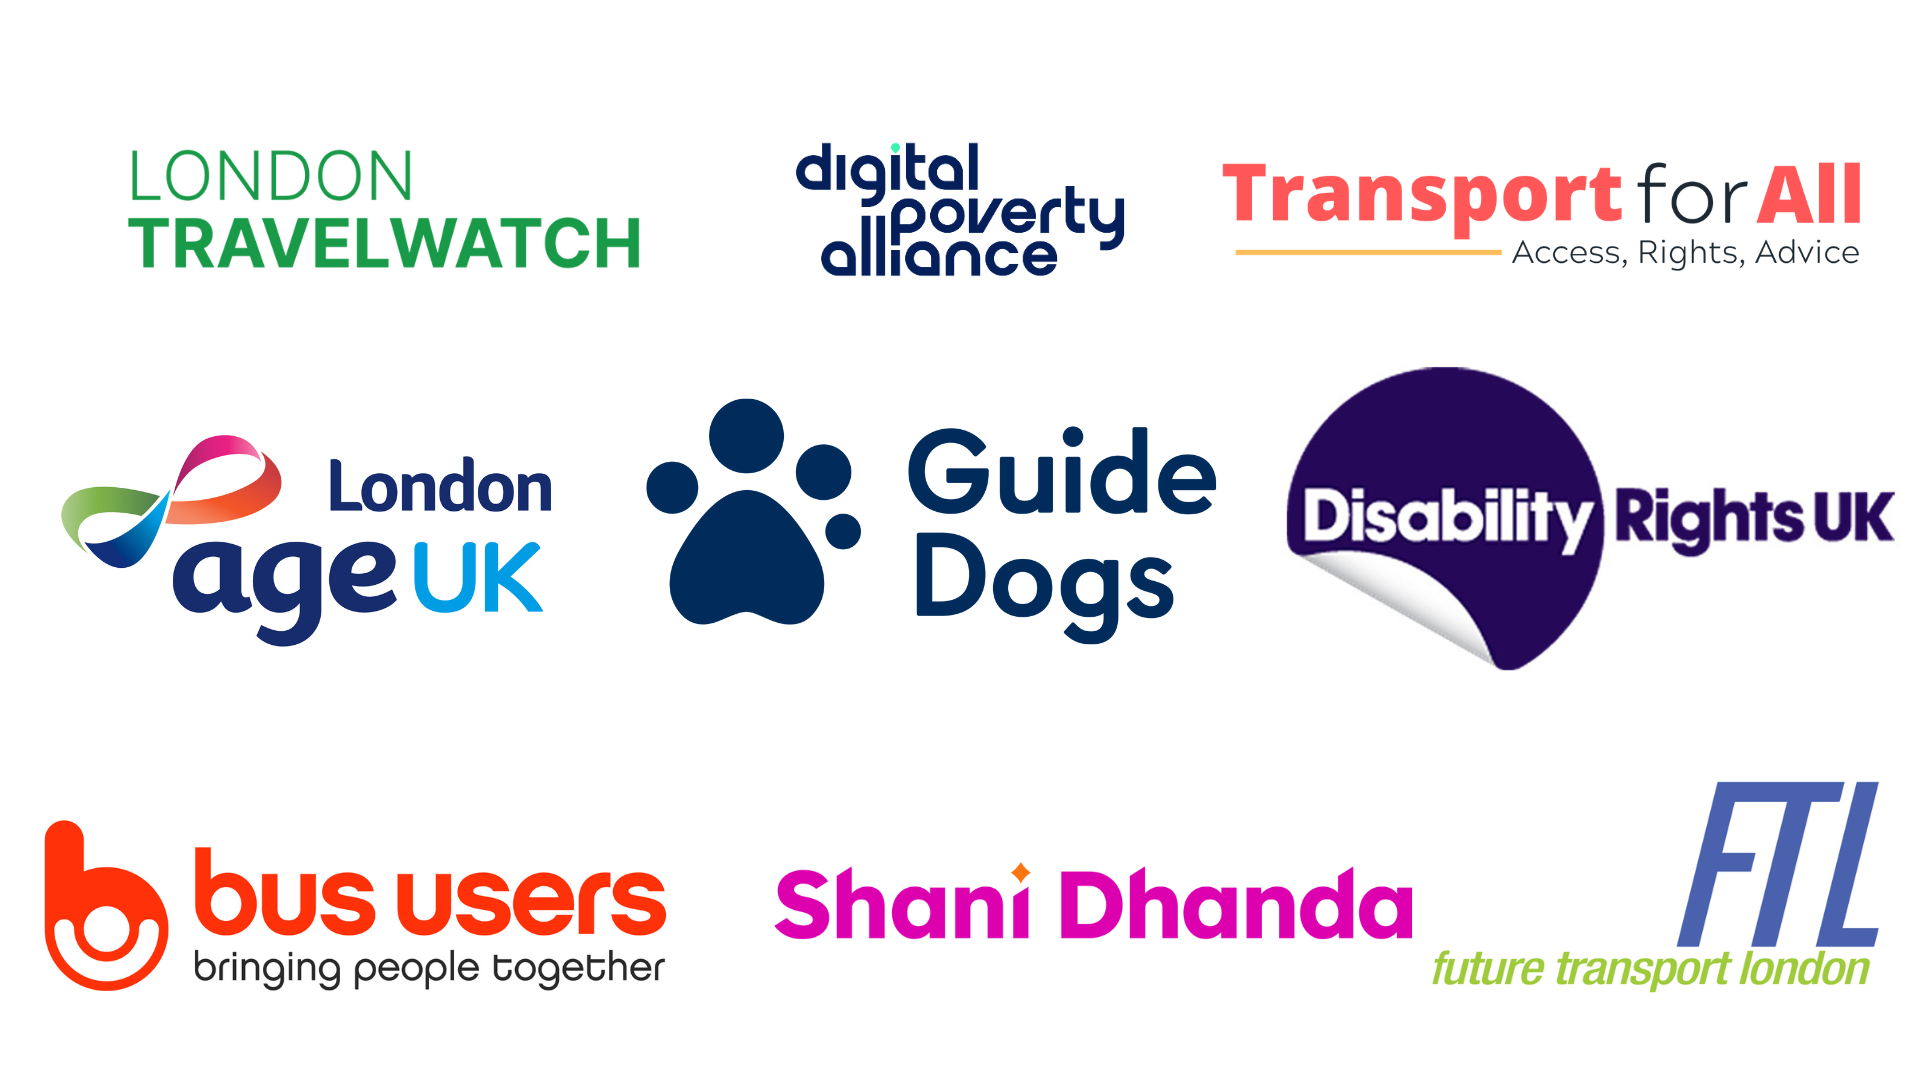 Logos of the signatories to London TravelWatch's open letter about our concerns around digital exclusion in transport. The organisation logos are: Transport for All, Age UK London, Guide Dogs, Disability Rights UK, Bus Users UK, Shani Dhanda, Future Transport London and the digital poverty alliance